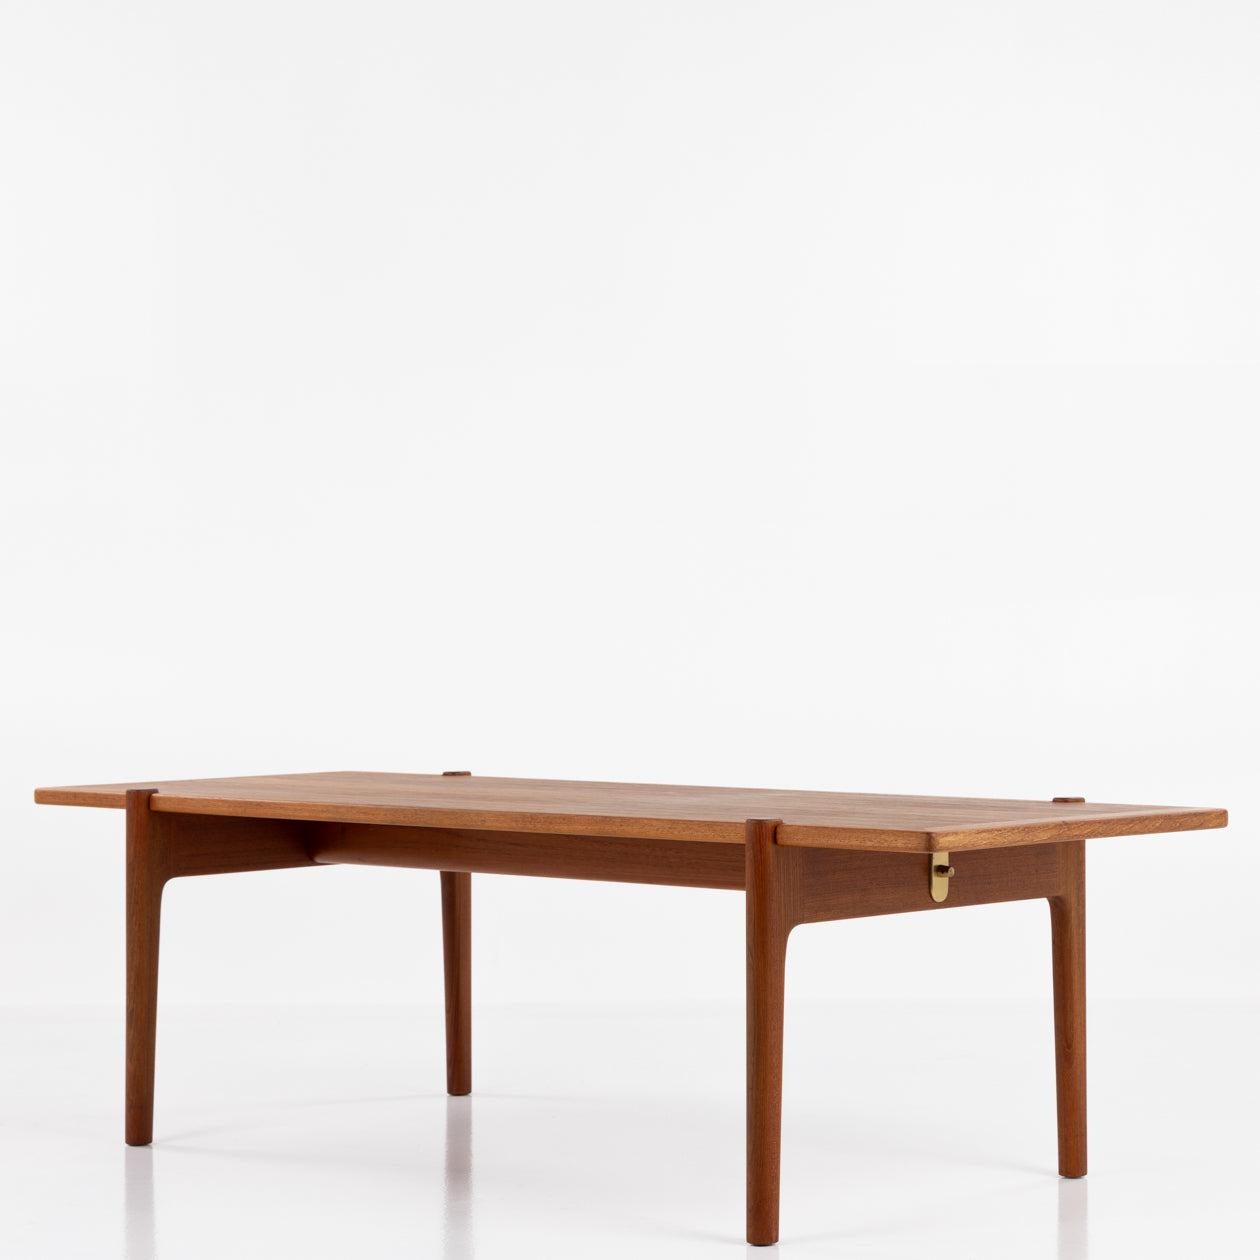 Teak coffee table with reversible top.
Manufactered by Johannes Hansen.